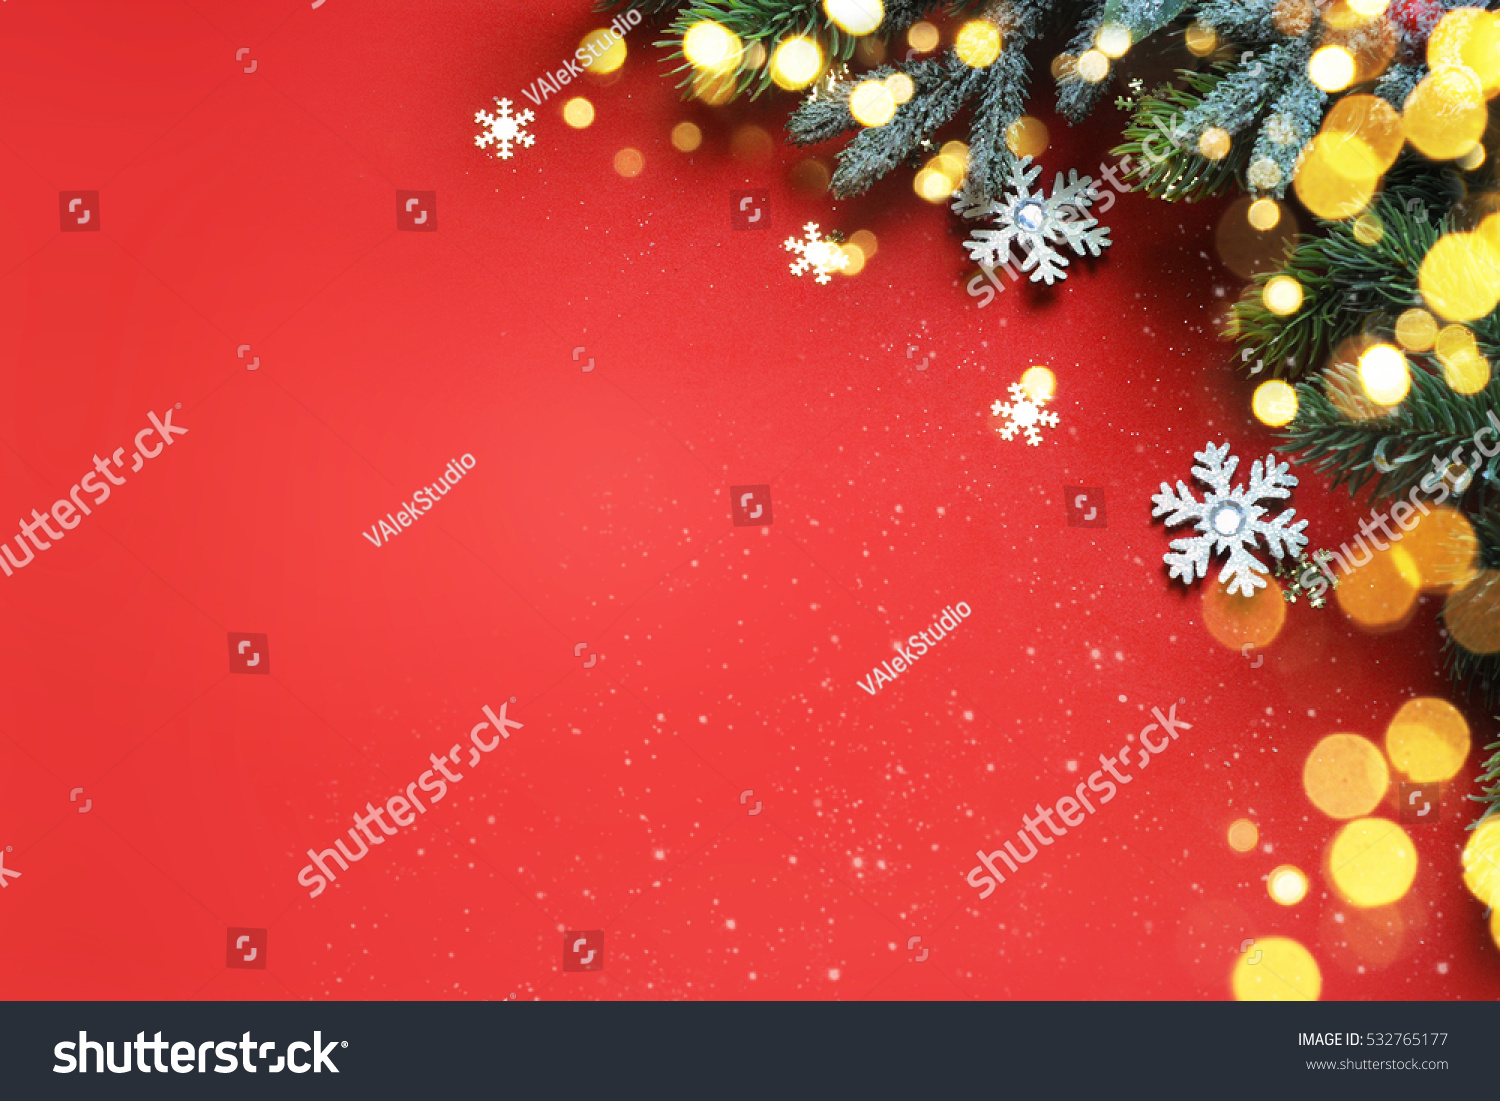  Christmas ornaments on blue background, border design, top view #532765177